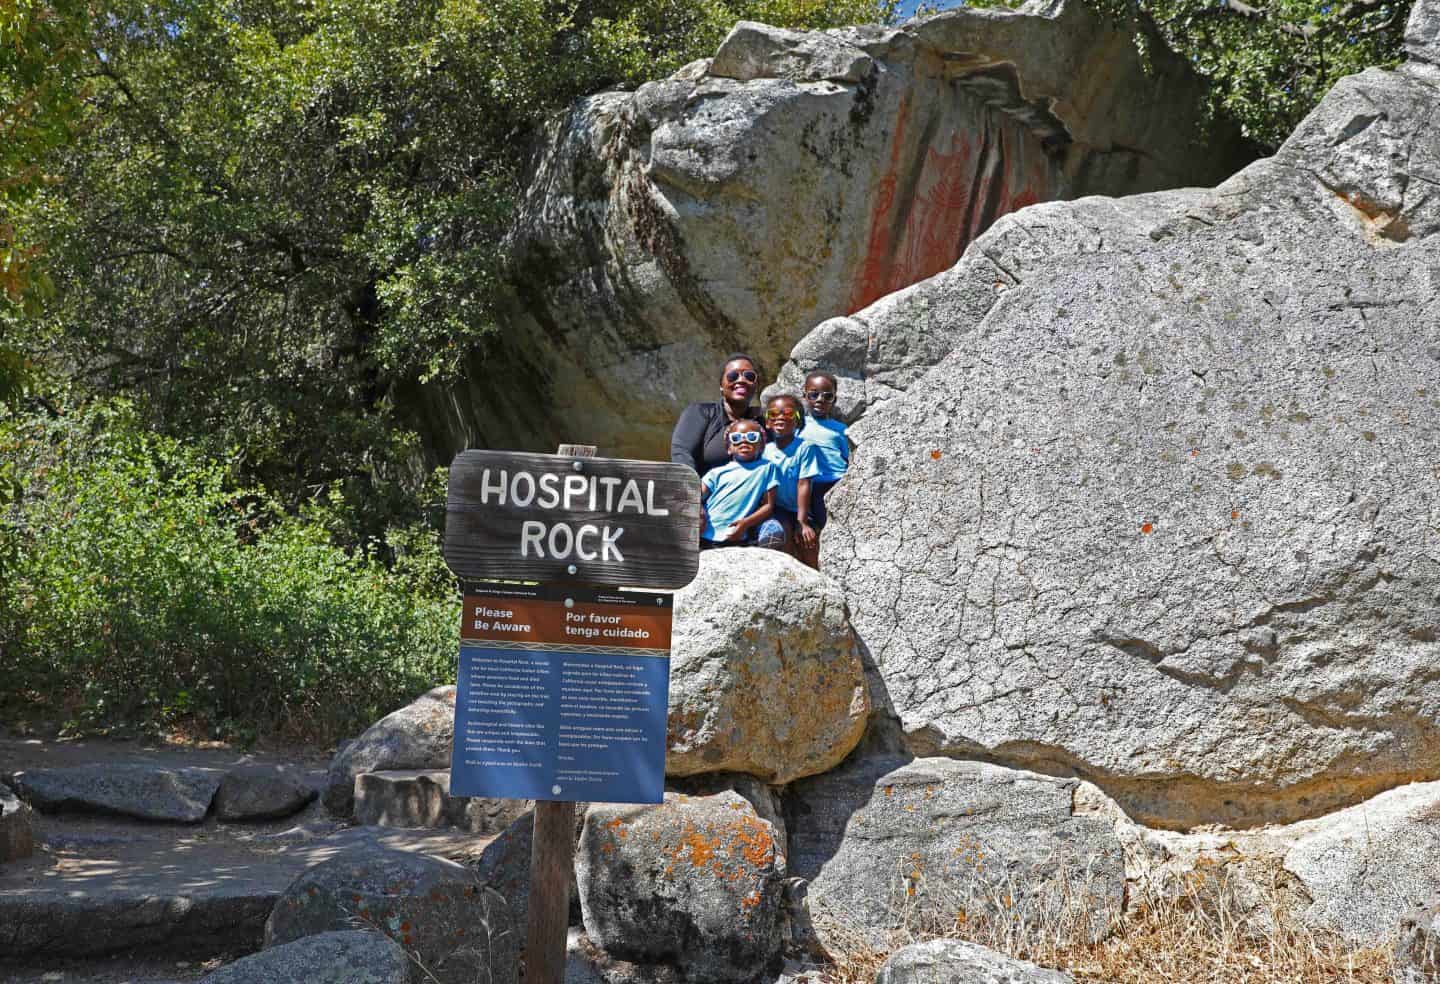 sequoia national park with kids